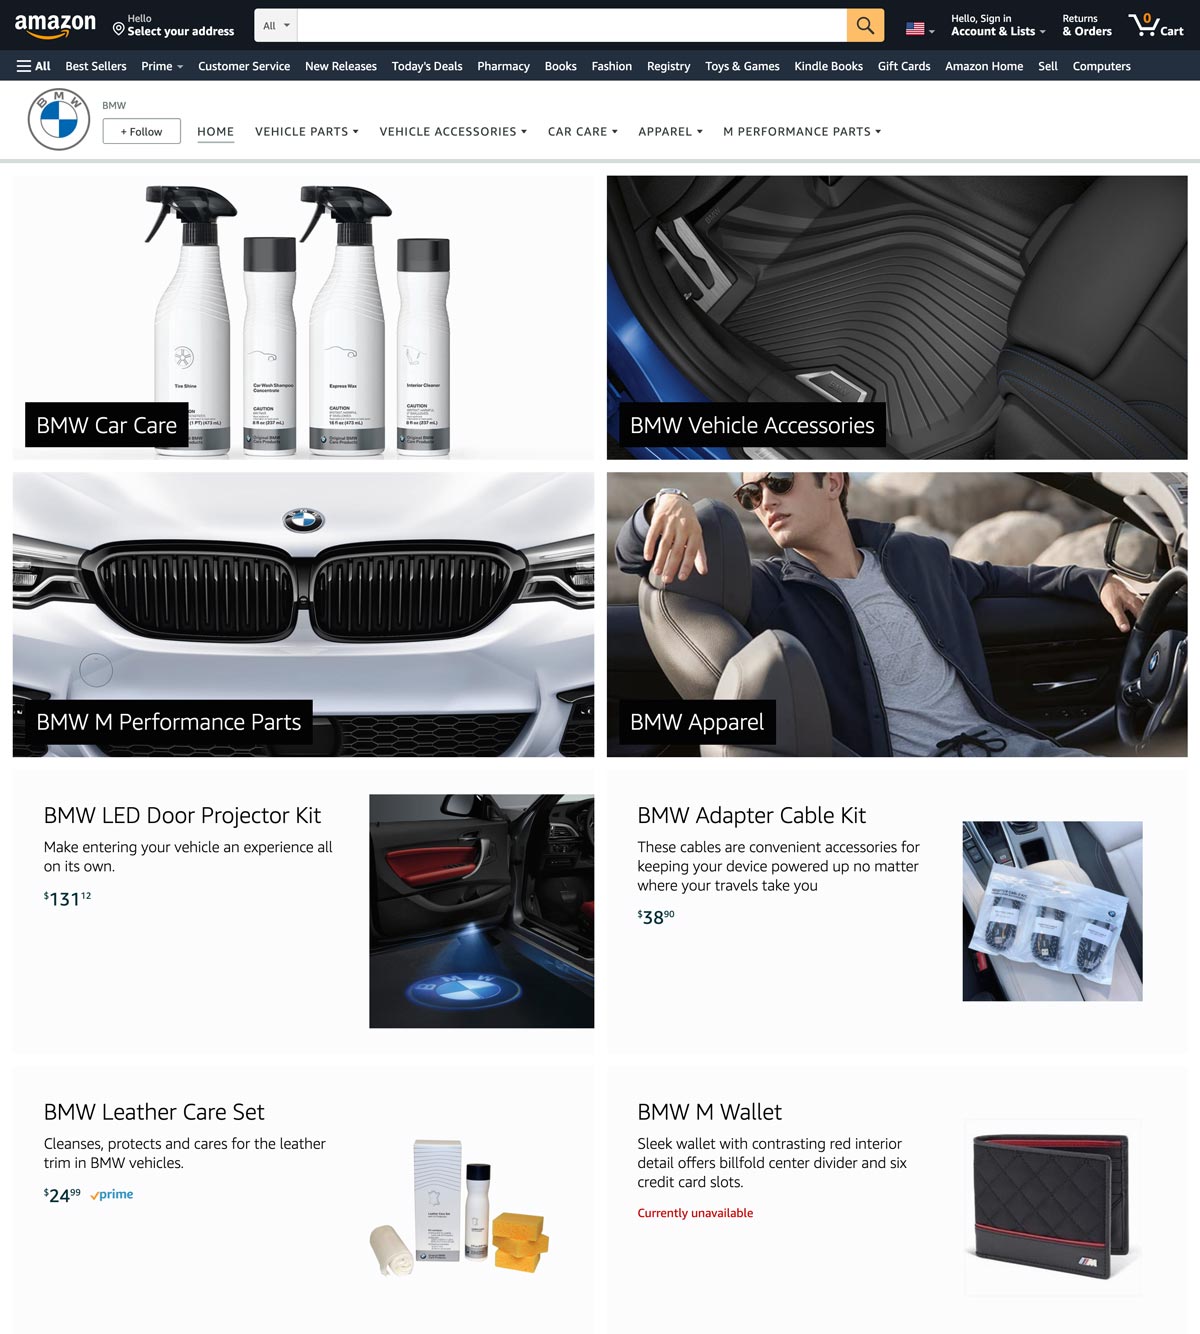 Screenshot of the BMW Amazon Seller Central homepage on Amazon.com